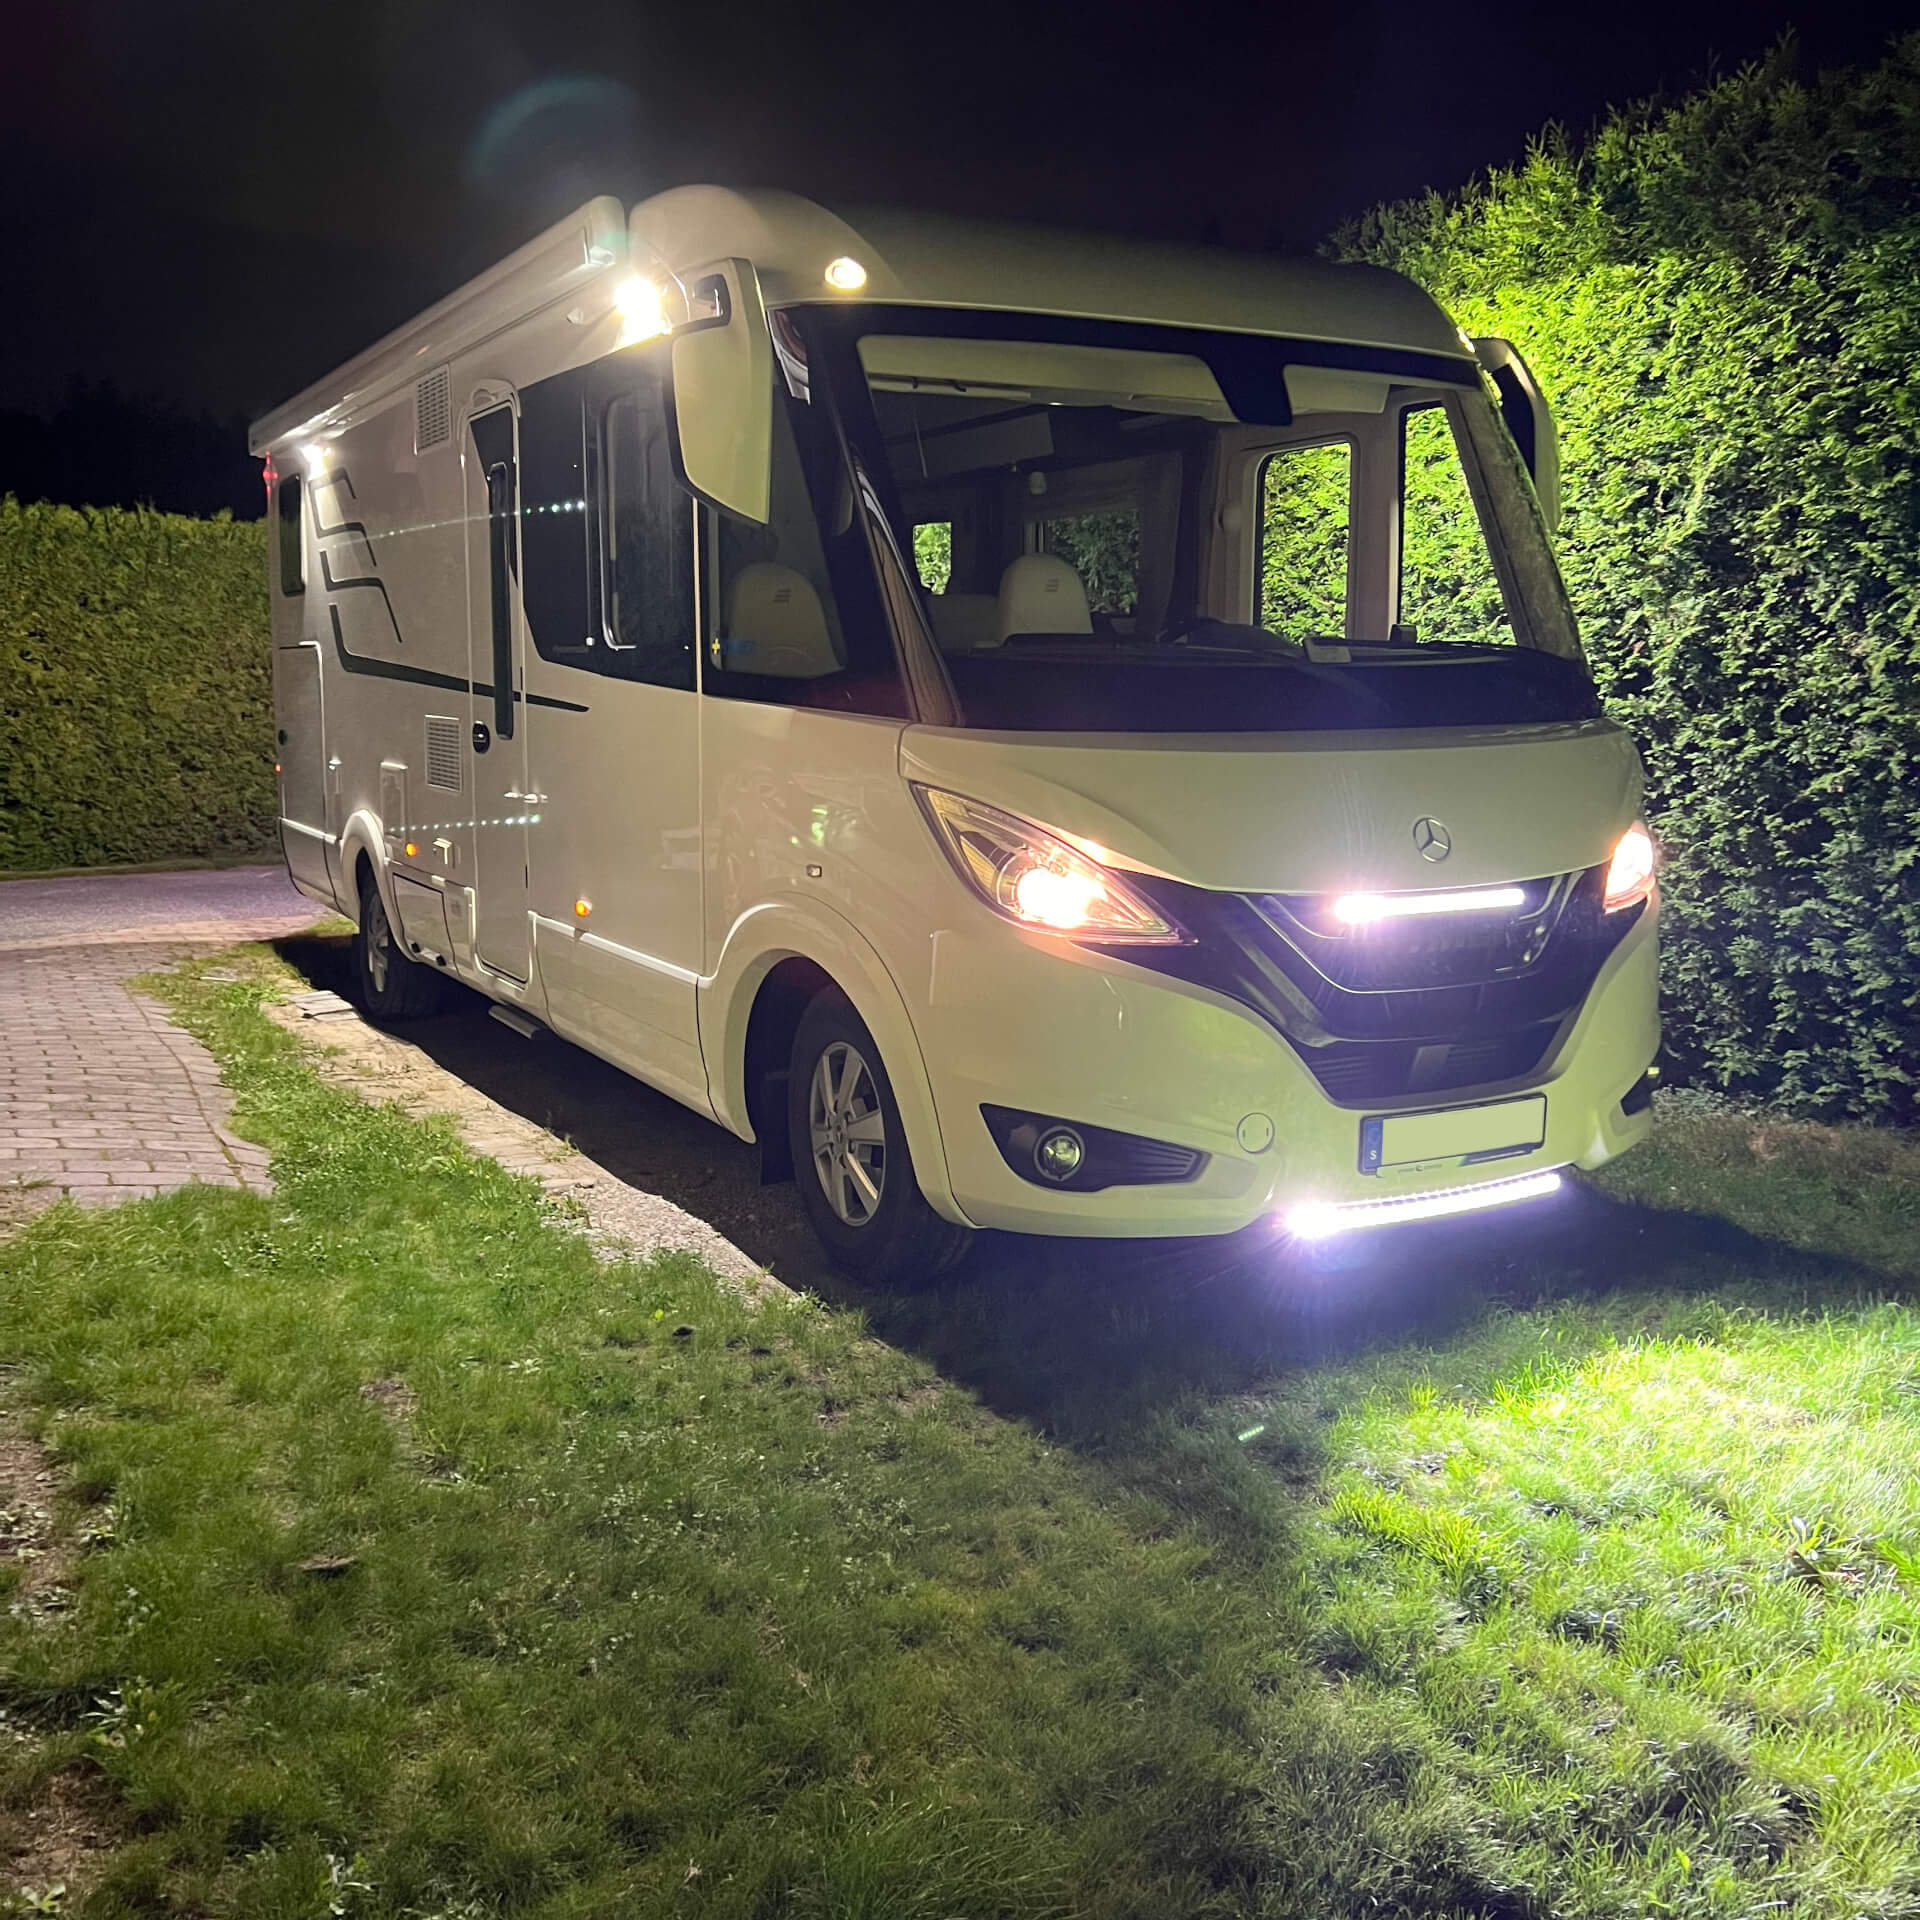 Here are some night action shots of the HYMER B780 that we did last week, with six Vision X 18W scene lights. This thing is lit! ☀️😎